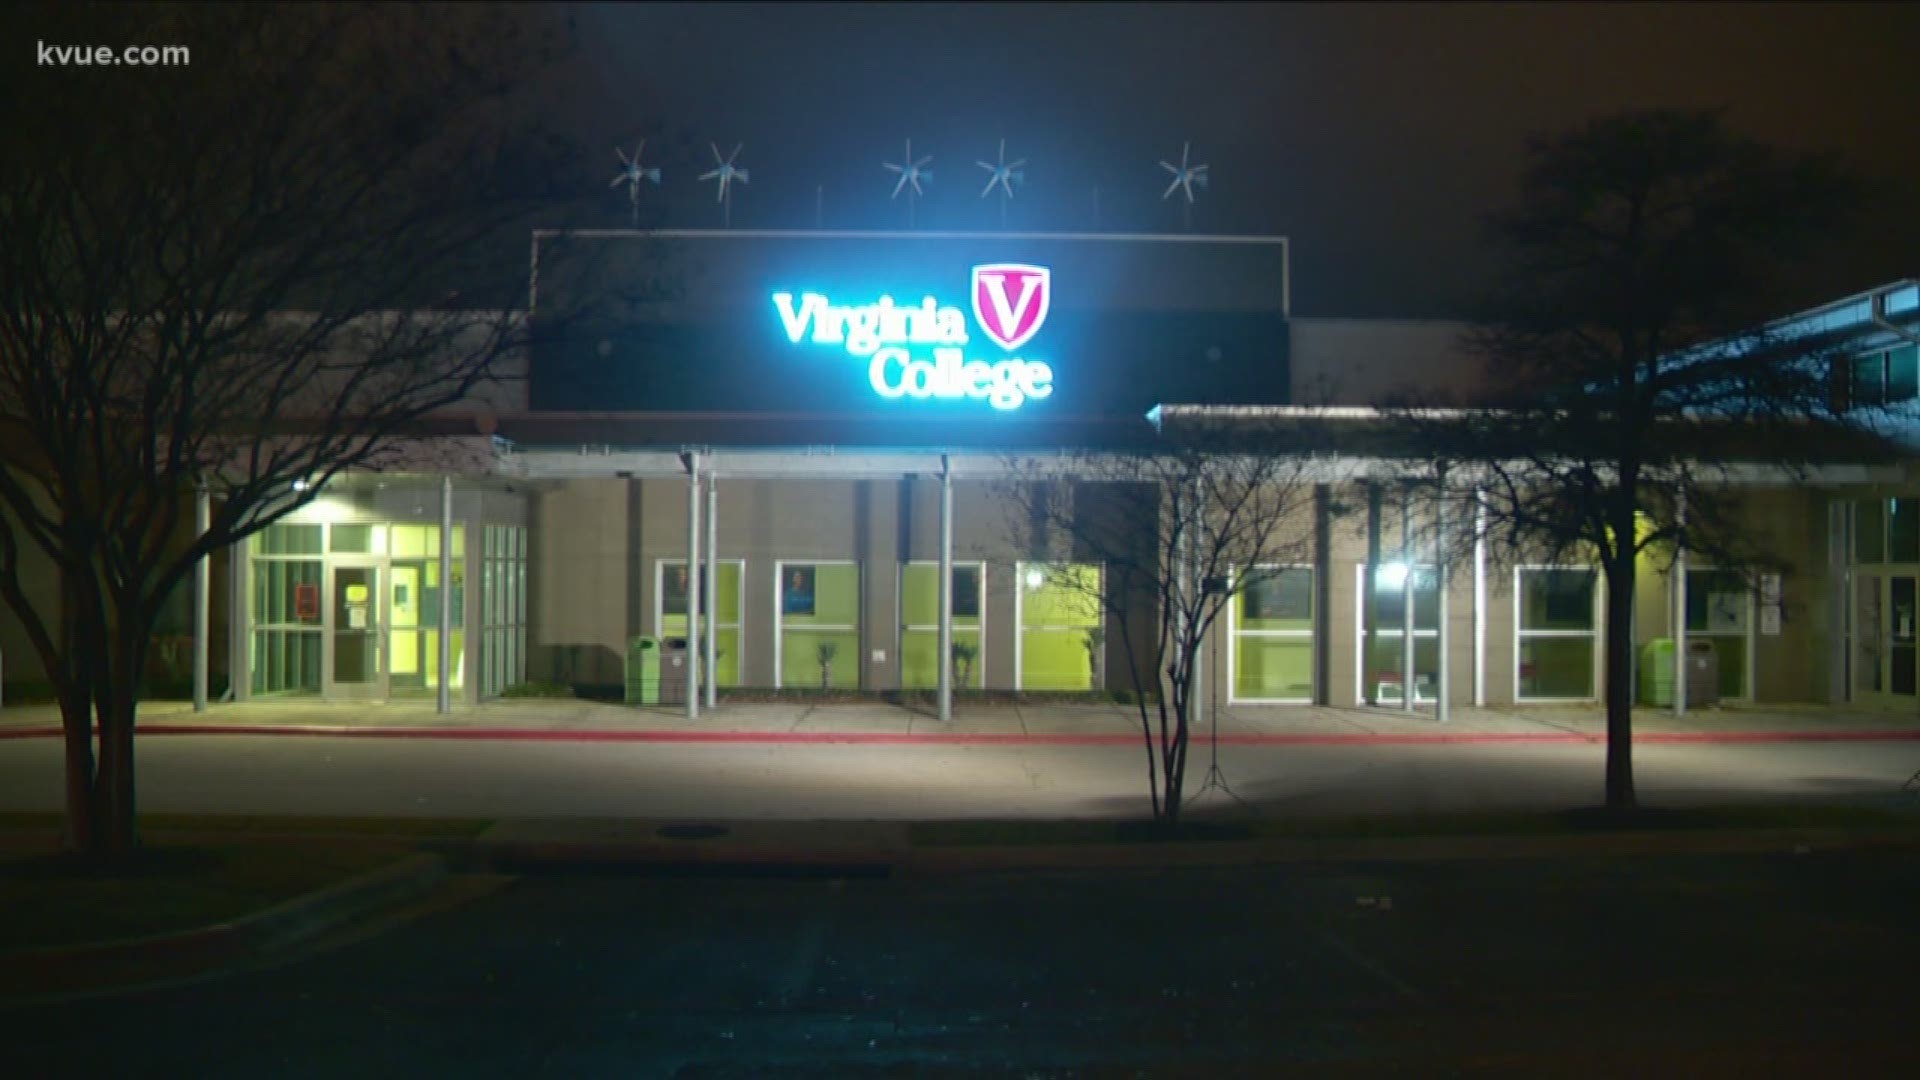 Virginia College announced they're closing the doors because the school didn't get its accreditation.